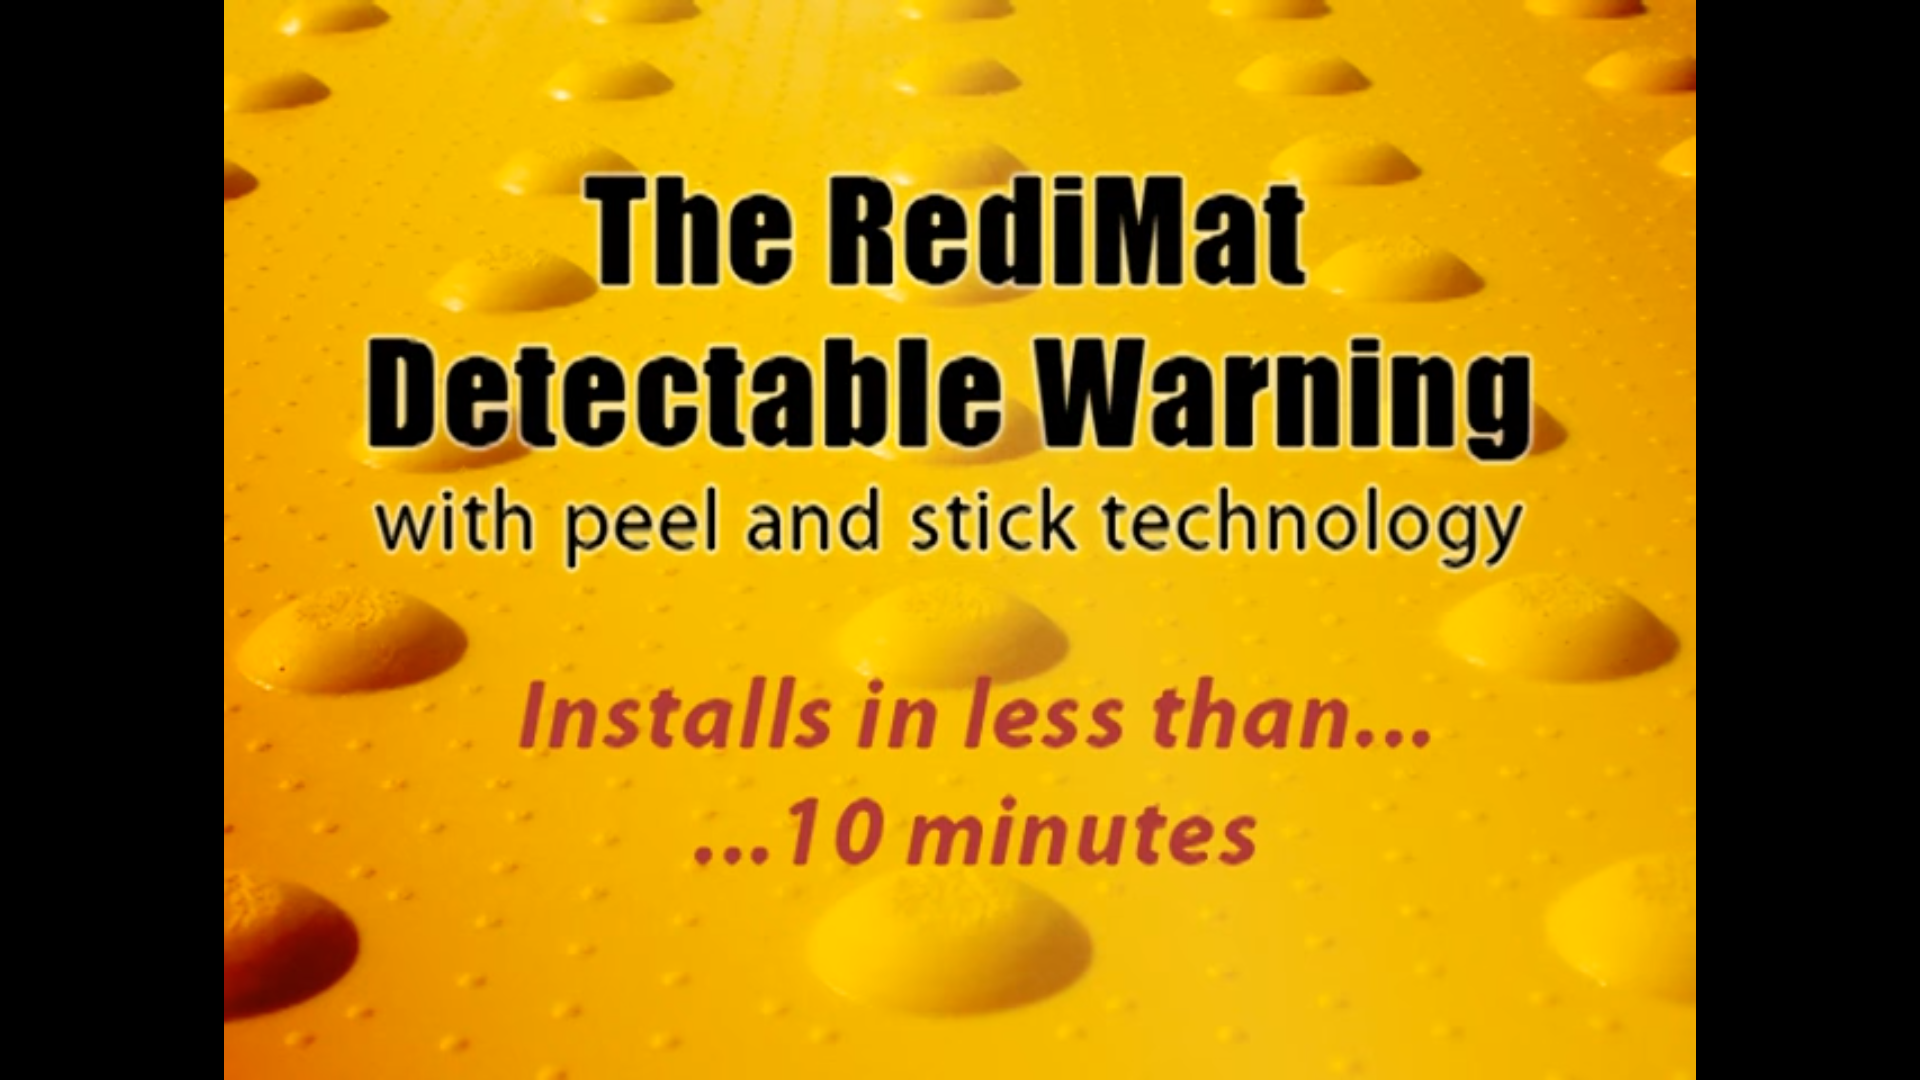 RediMat Duo: Branded Detectable Warning System Training Video